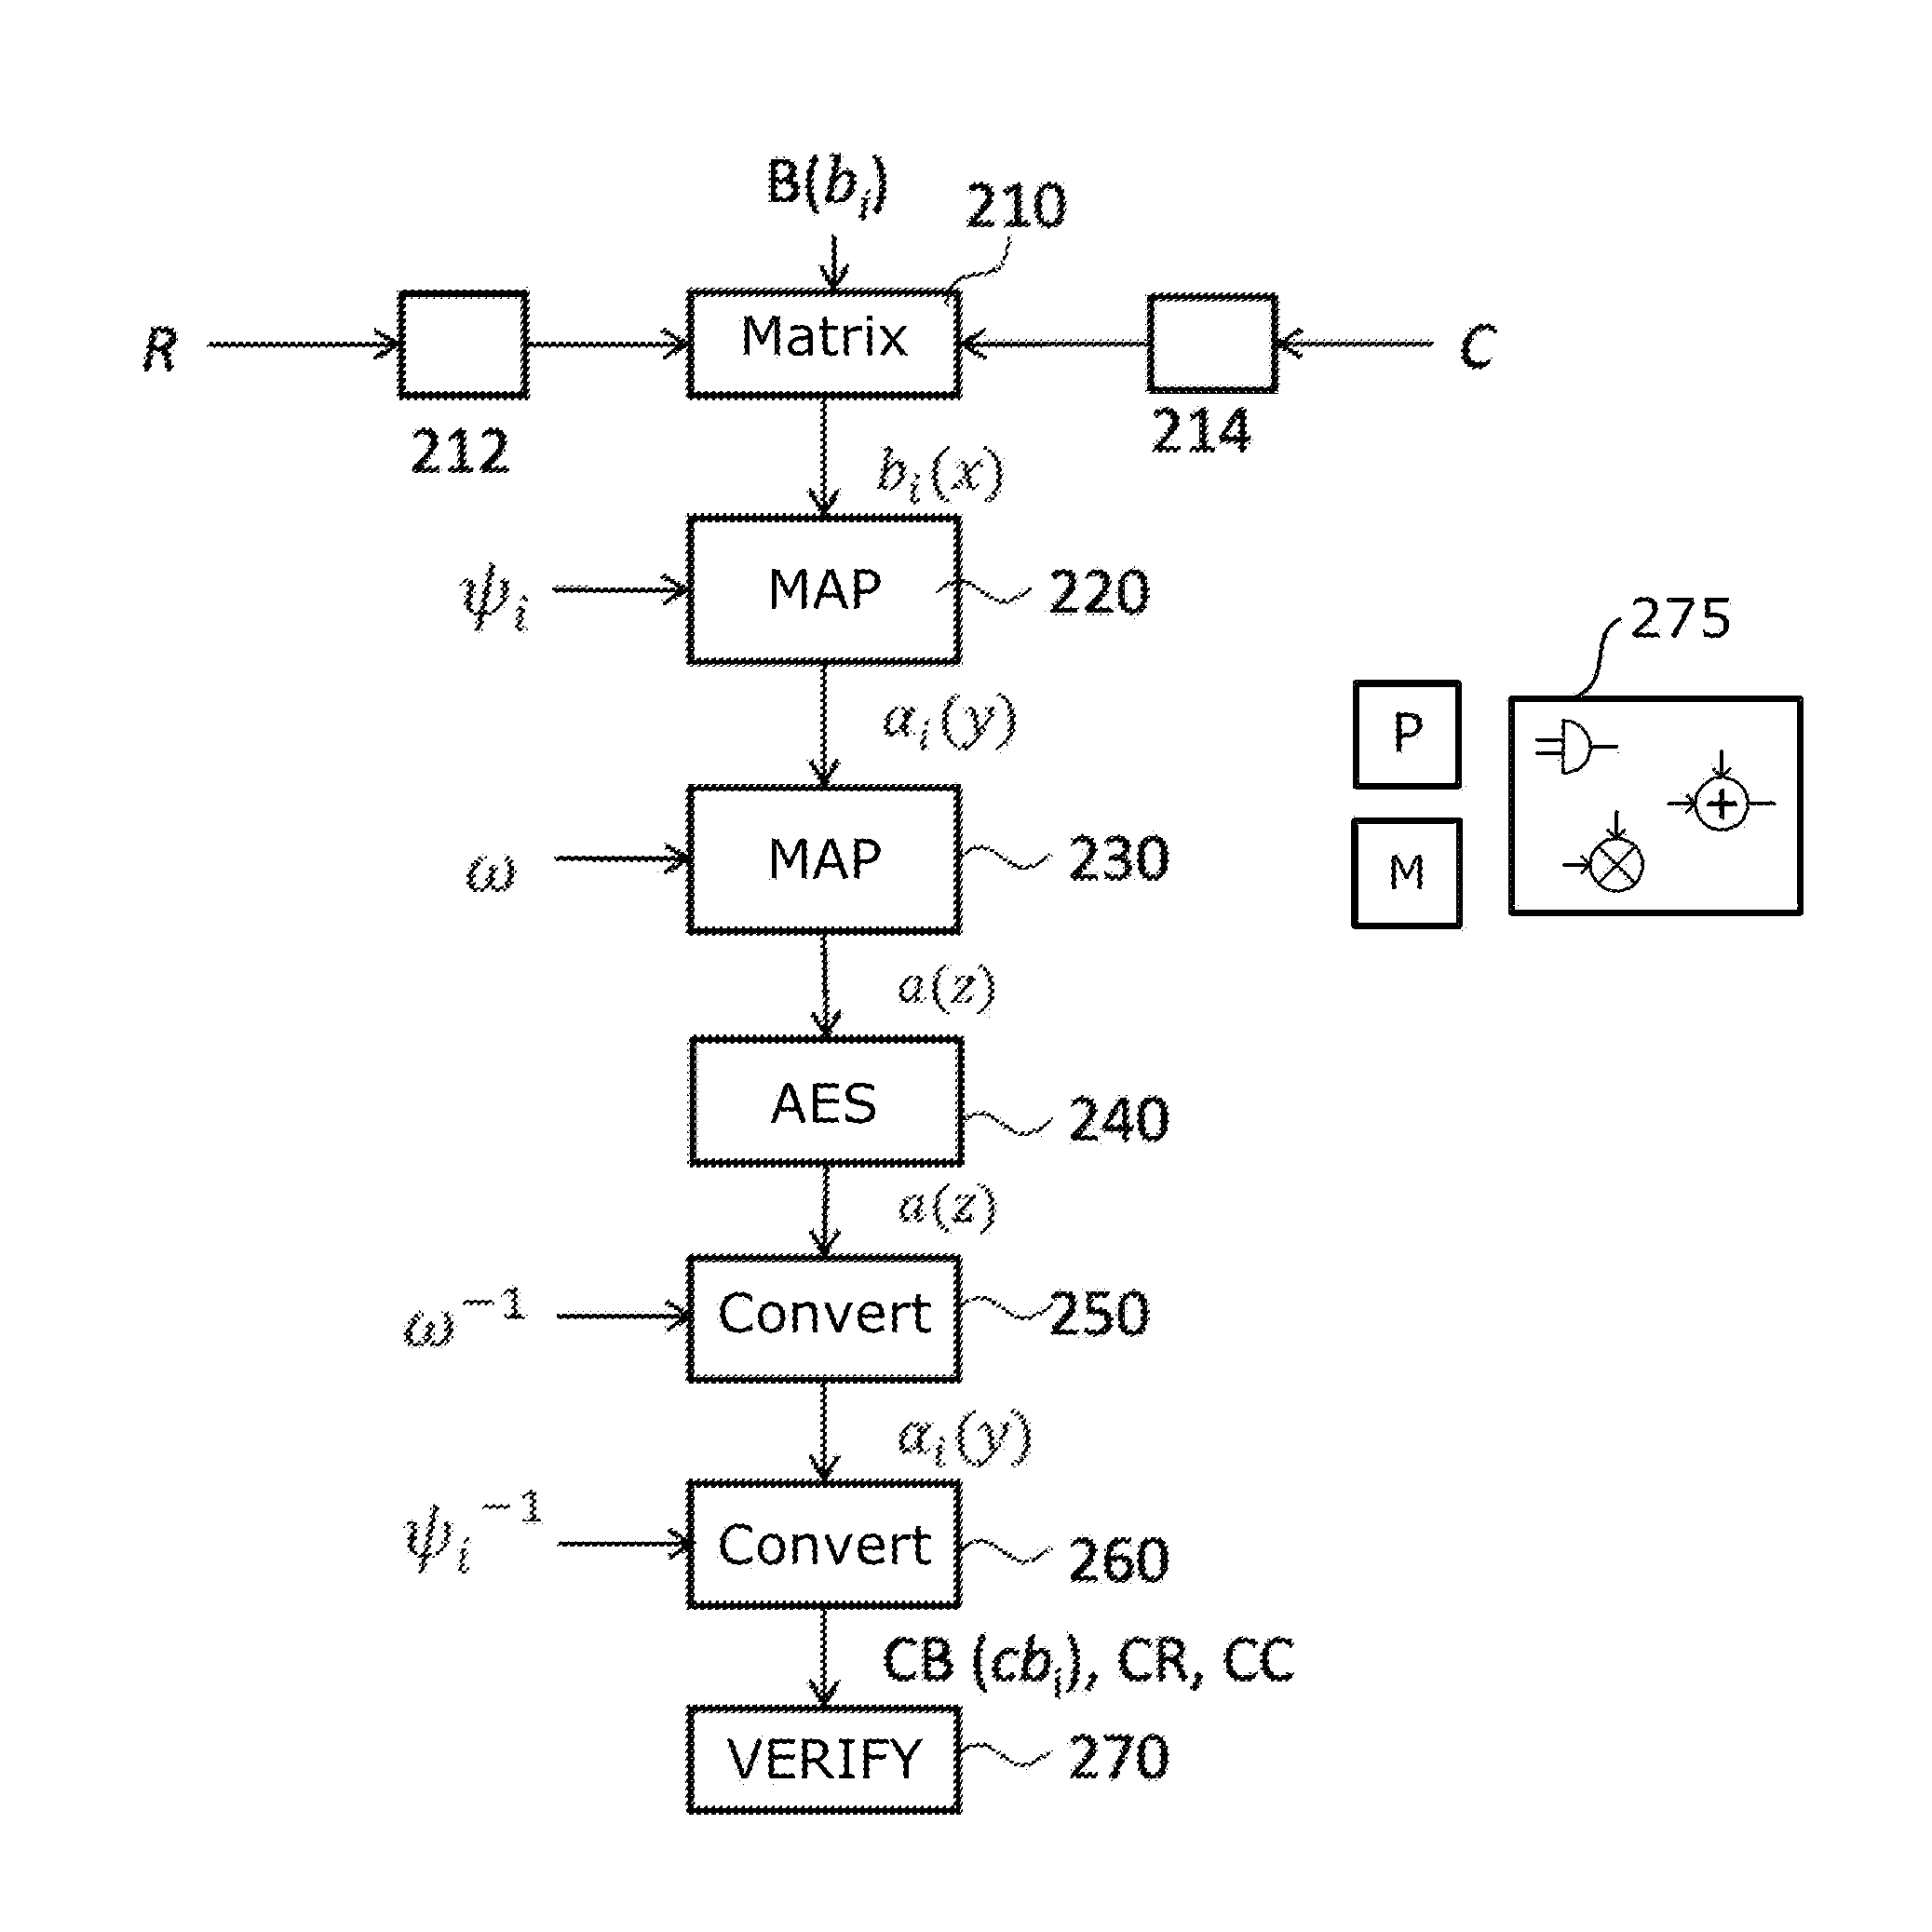 Method for performing an encryption of an aes type, and corresponding system and computer program product